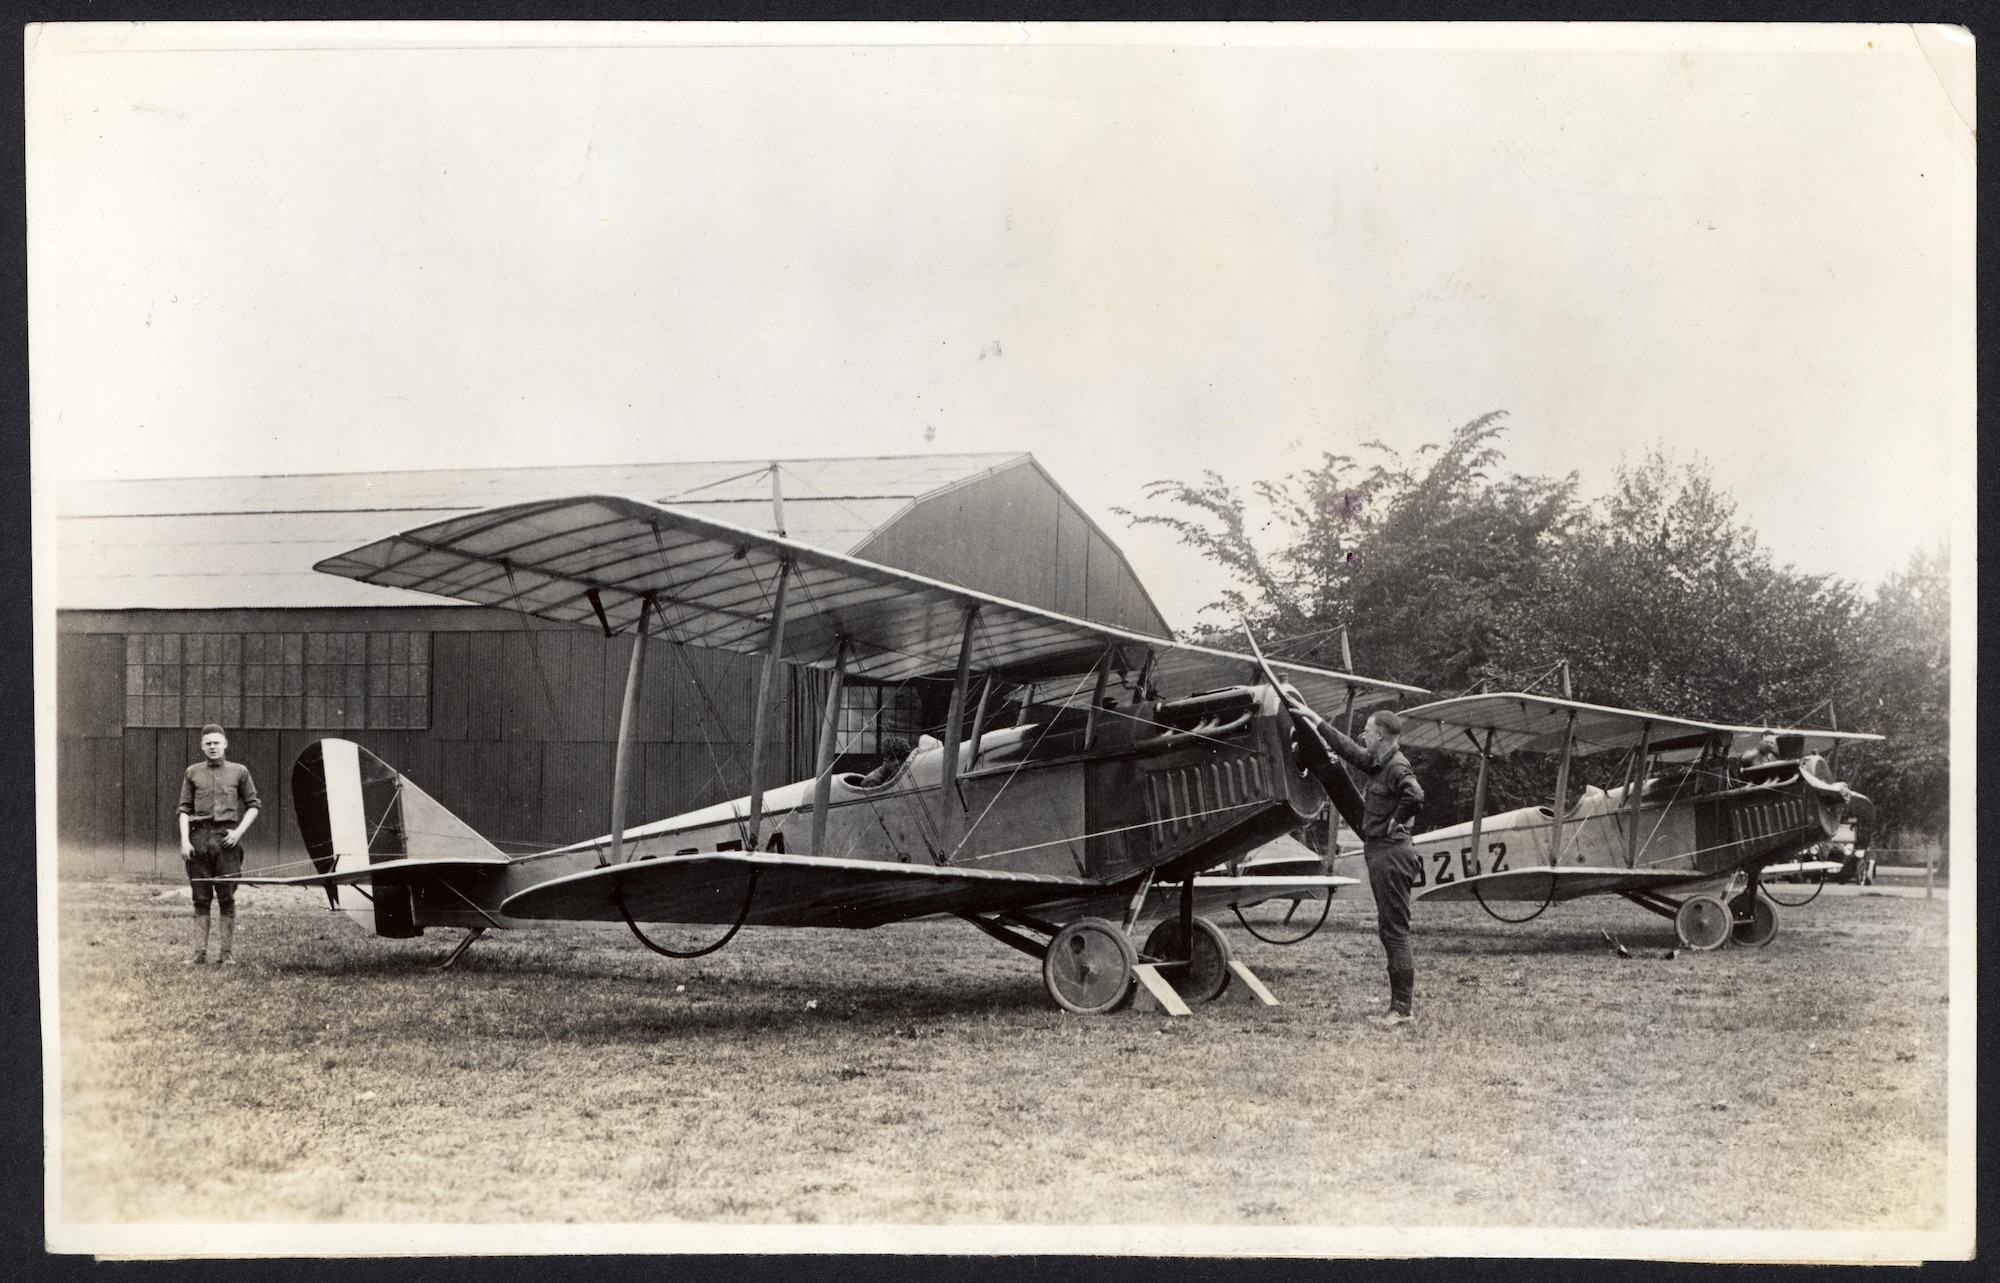 JN-4H Jenny, 1918-21: Earl Hoag (officer-in-charge of flying) and A. J. Etheridge (post engineer), along with 2nd Lt. Seth Thomas, designed two air ambulances, or hospital ships, by modifying Jenny aircraft to carry patients. On Aug. 24, 1918, Scott’s air ambulance transported its first patient. 